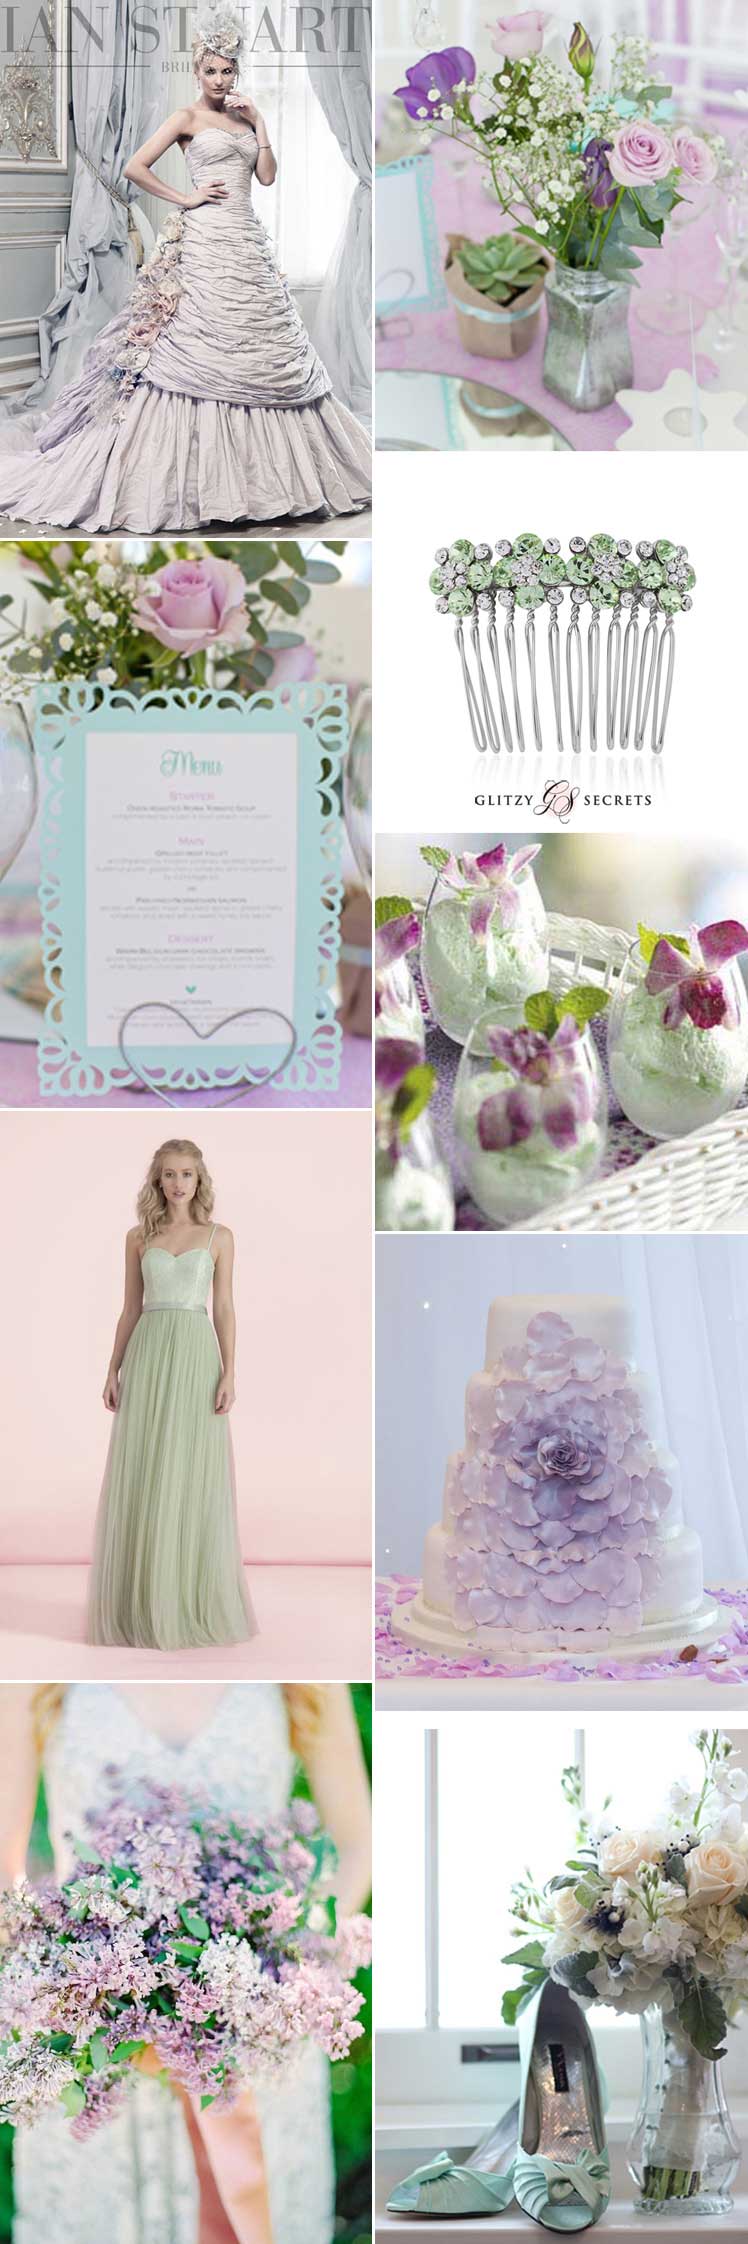 Inspiration for a lilac and mint wedding theme